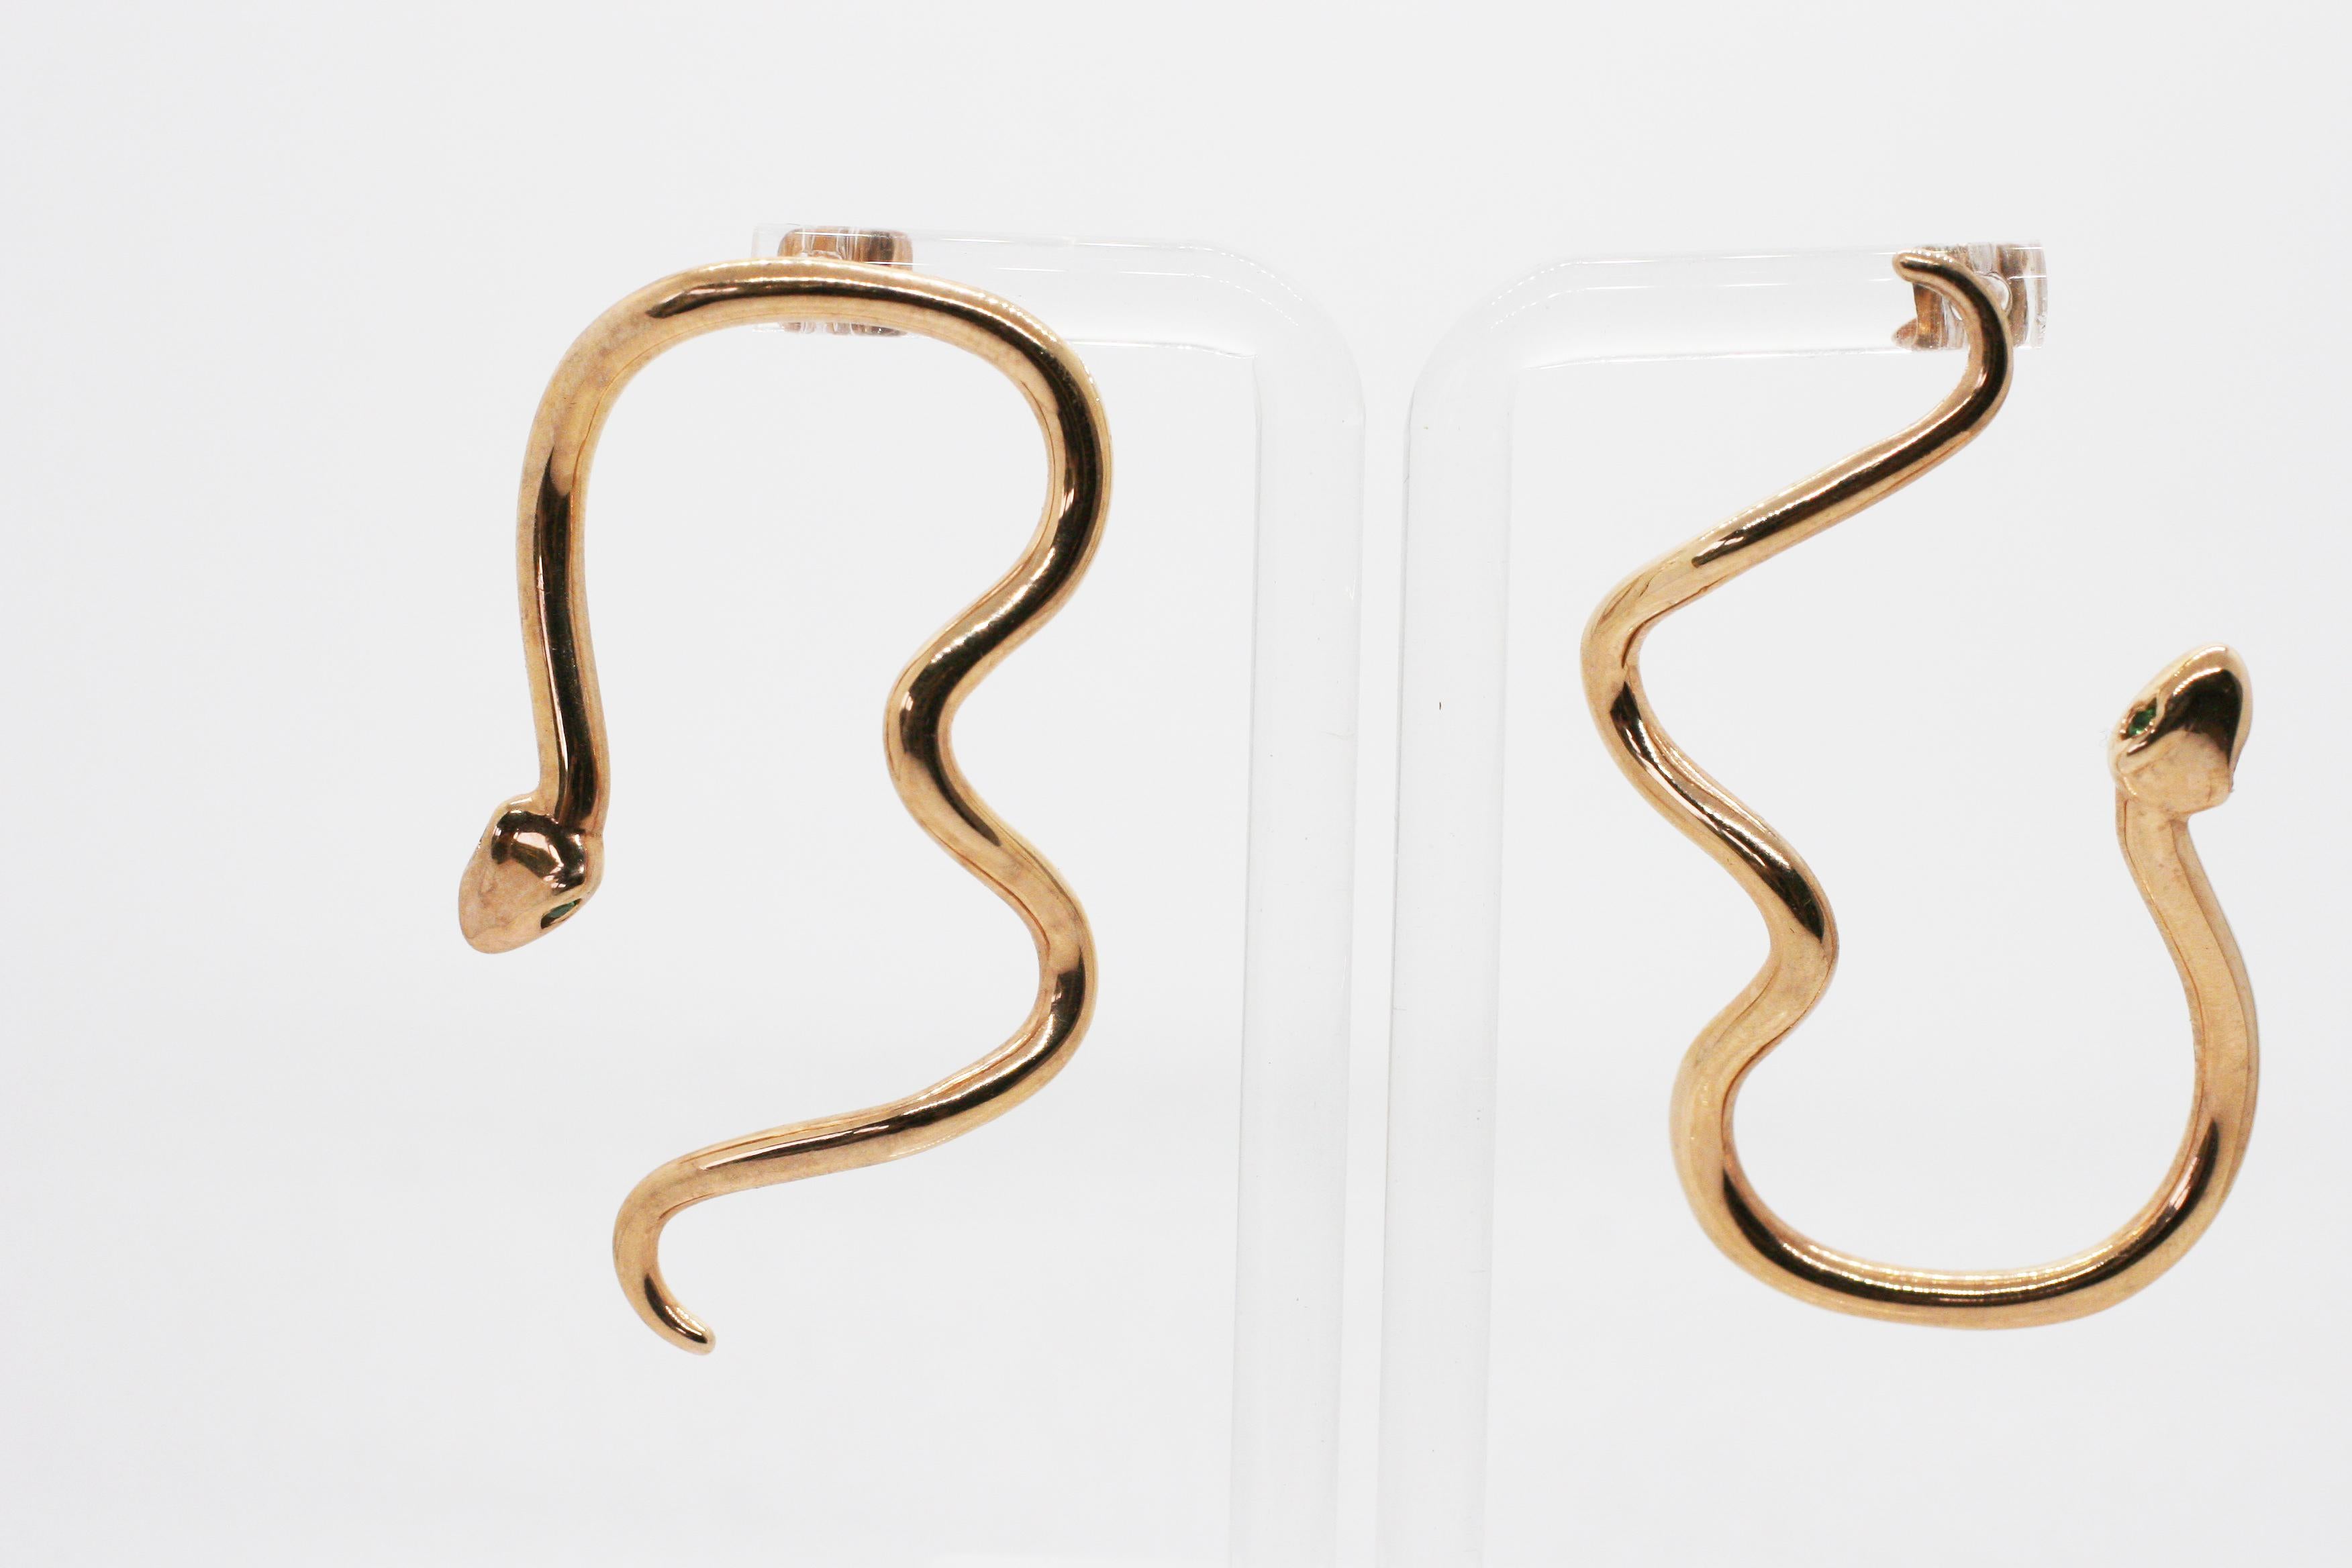 Large Rose Gold Plated Sterling Sliver Signature Snake Hoops feature two oversize curved snakes that frame the face in alternating directions with green tsavorite eyes
Includes earring backings
Sold as a Pair